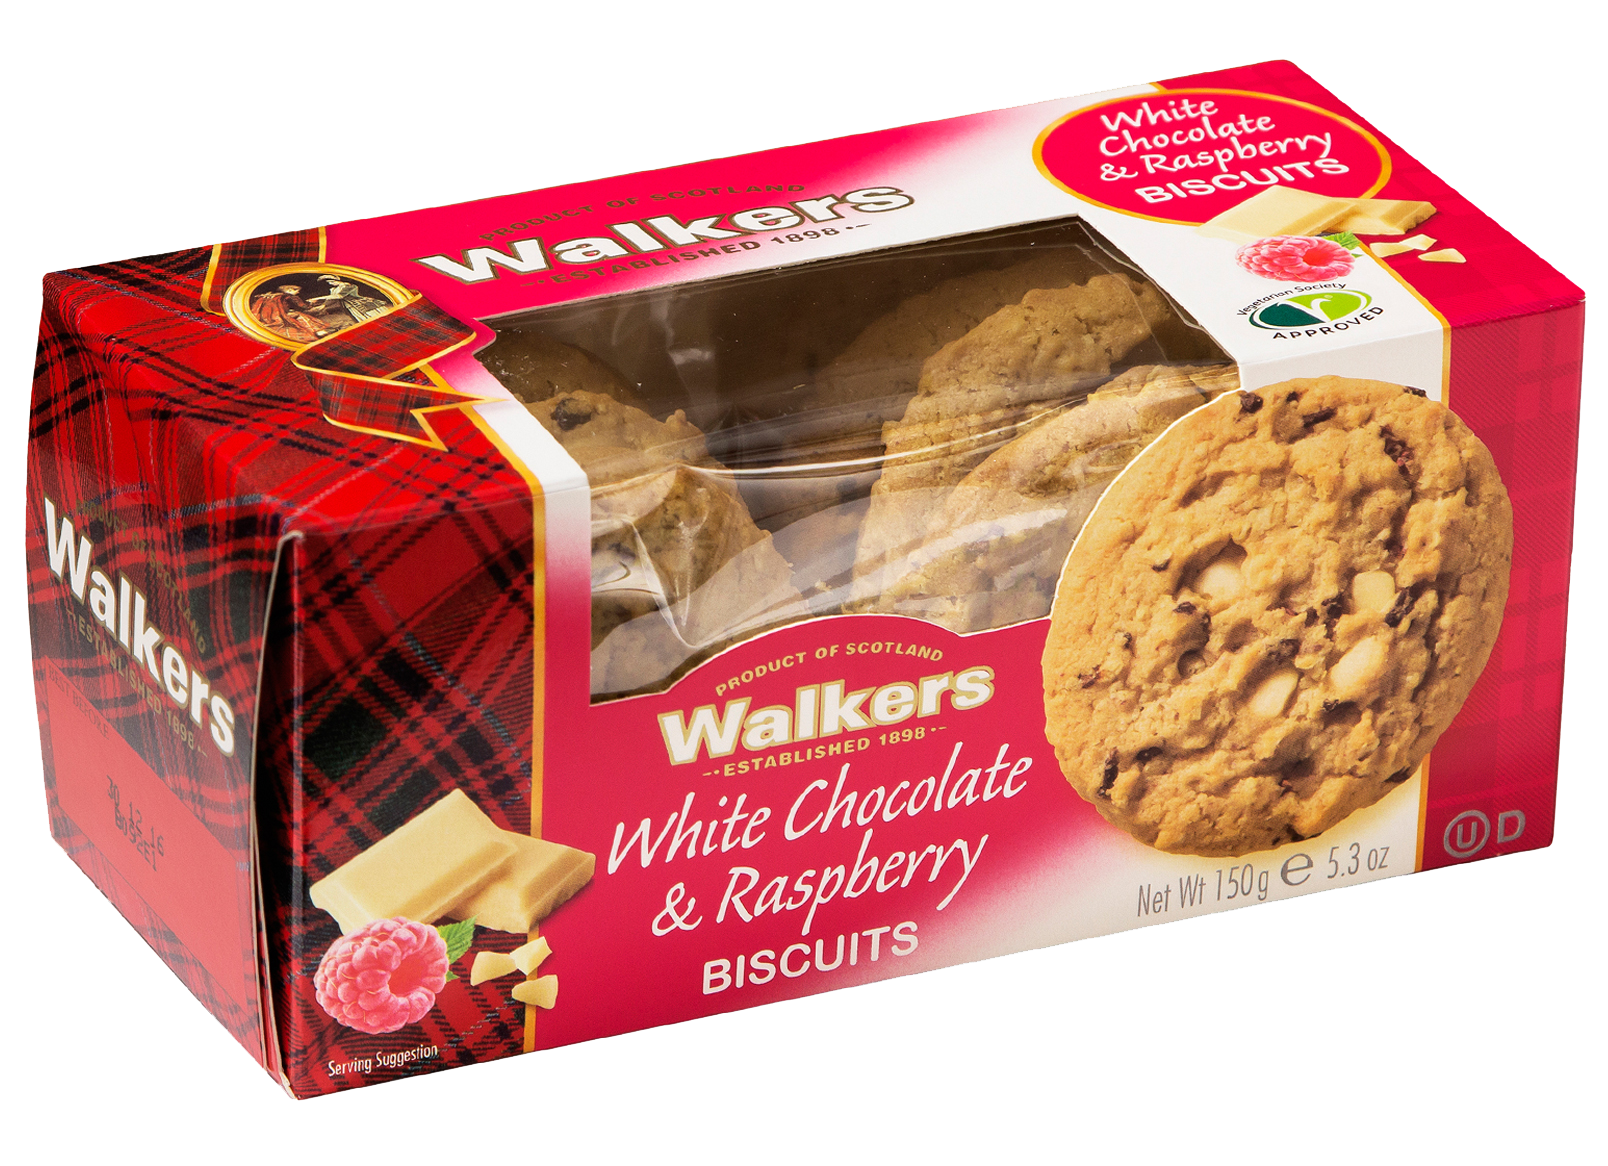 A carton of Walkers White Chocolate and Raspberry Biscuits